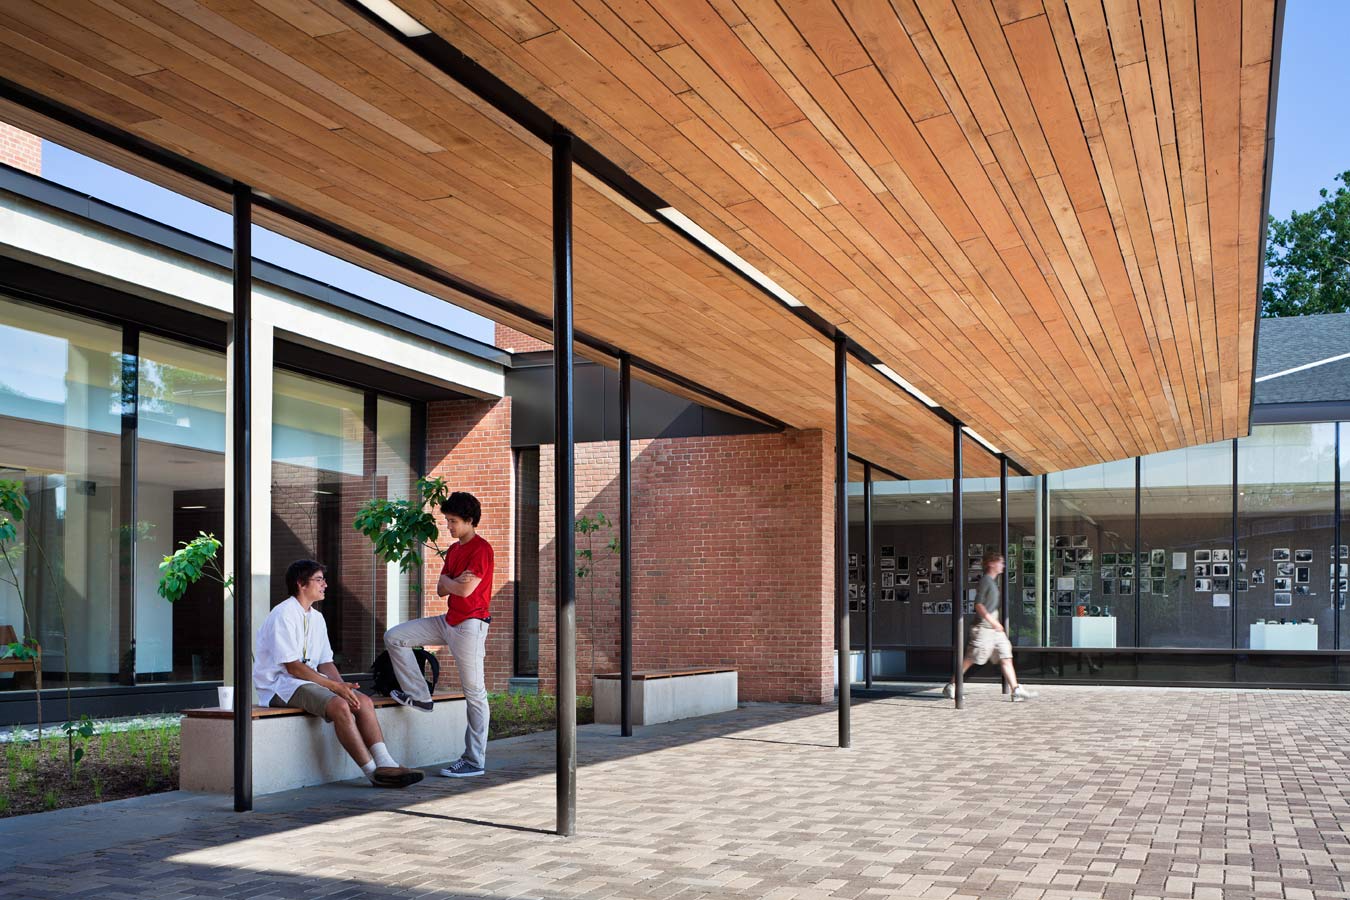 <p>The canopy and benches create a transition space between the life of the renewed plaza and the Meeting House. A narrow, tree-lined garden filters light entering the central lobby and gallery. <br><small>&copy; Michael Moran/OTTO</small></p>